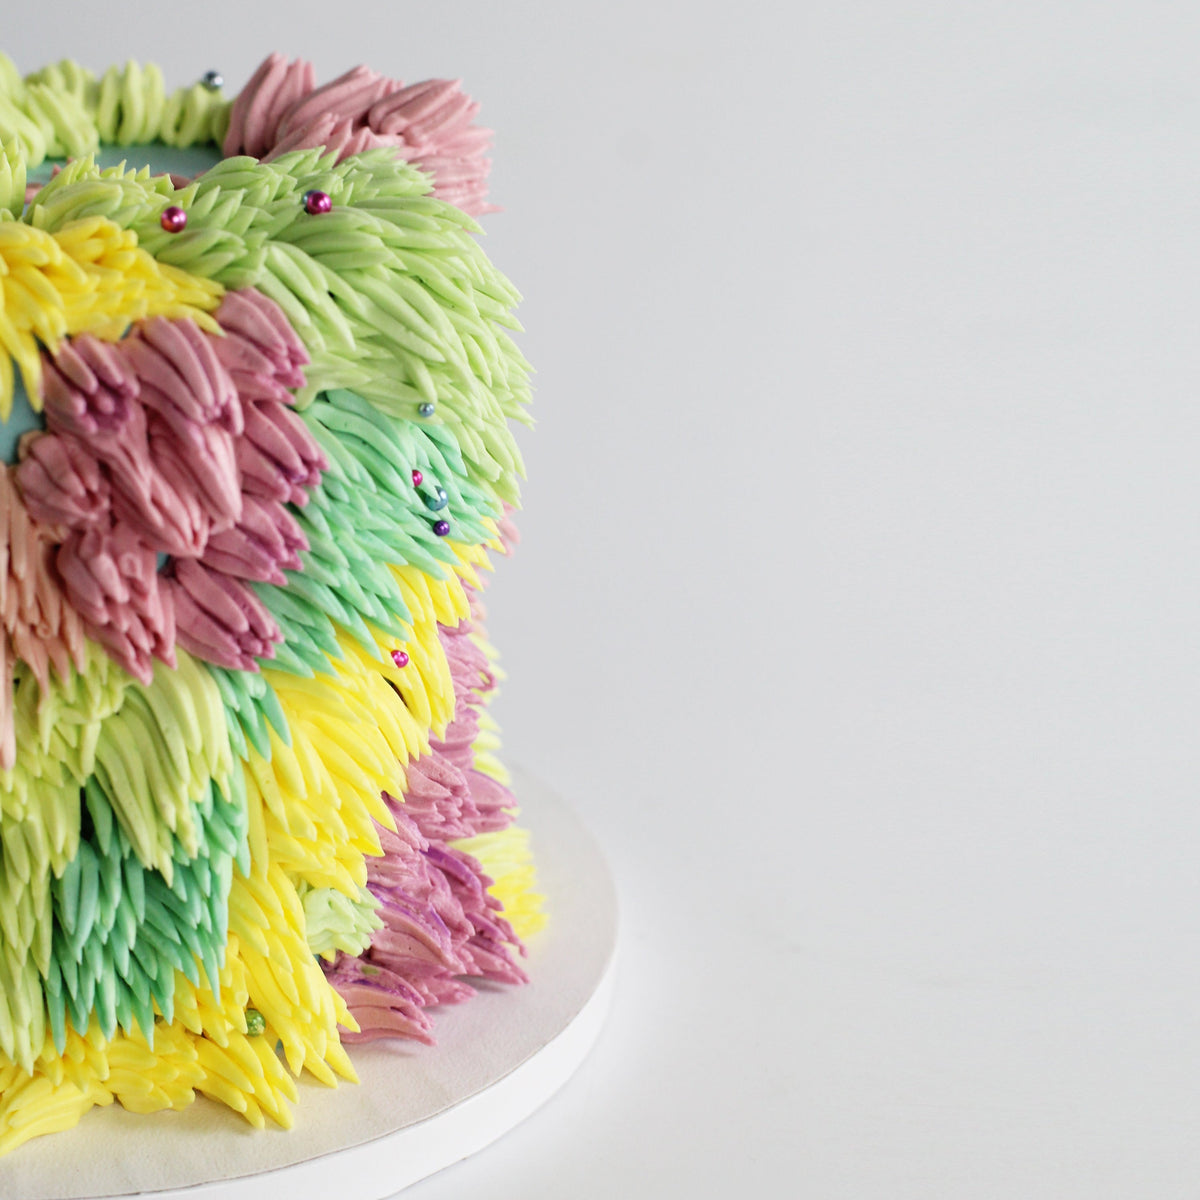 The colorful Shag Cake is designed to bring fun to any gathering.